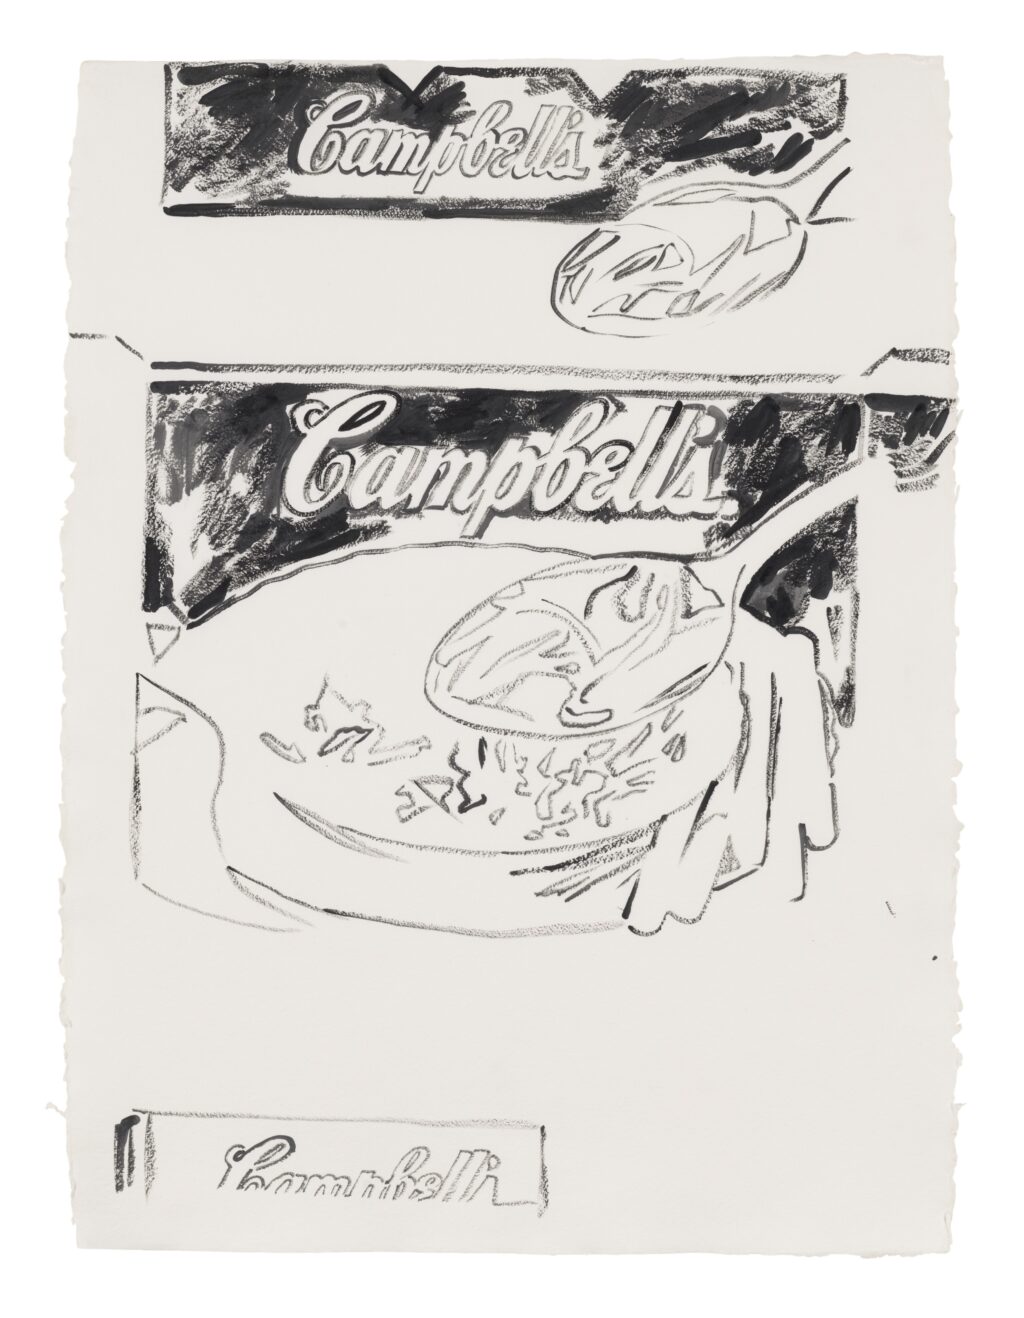 <p>GALERIE BASTIAN</p>
<p> </p>
<p style="font-weight: 400;">Andy Warhol, Campbell’s Soup Box, 1986, © The Andy Warhol Foundation for the Visual Arts, Inc., Courtesy Galerie Bastian, Berlin</p>
